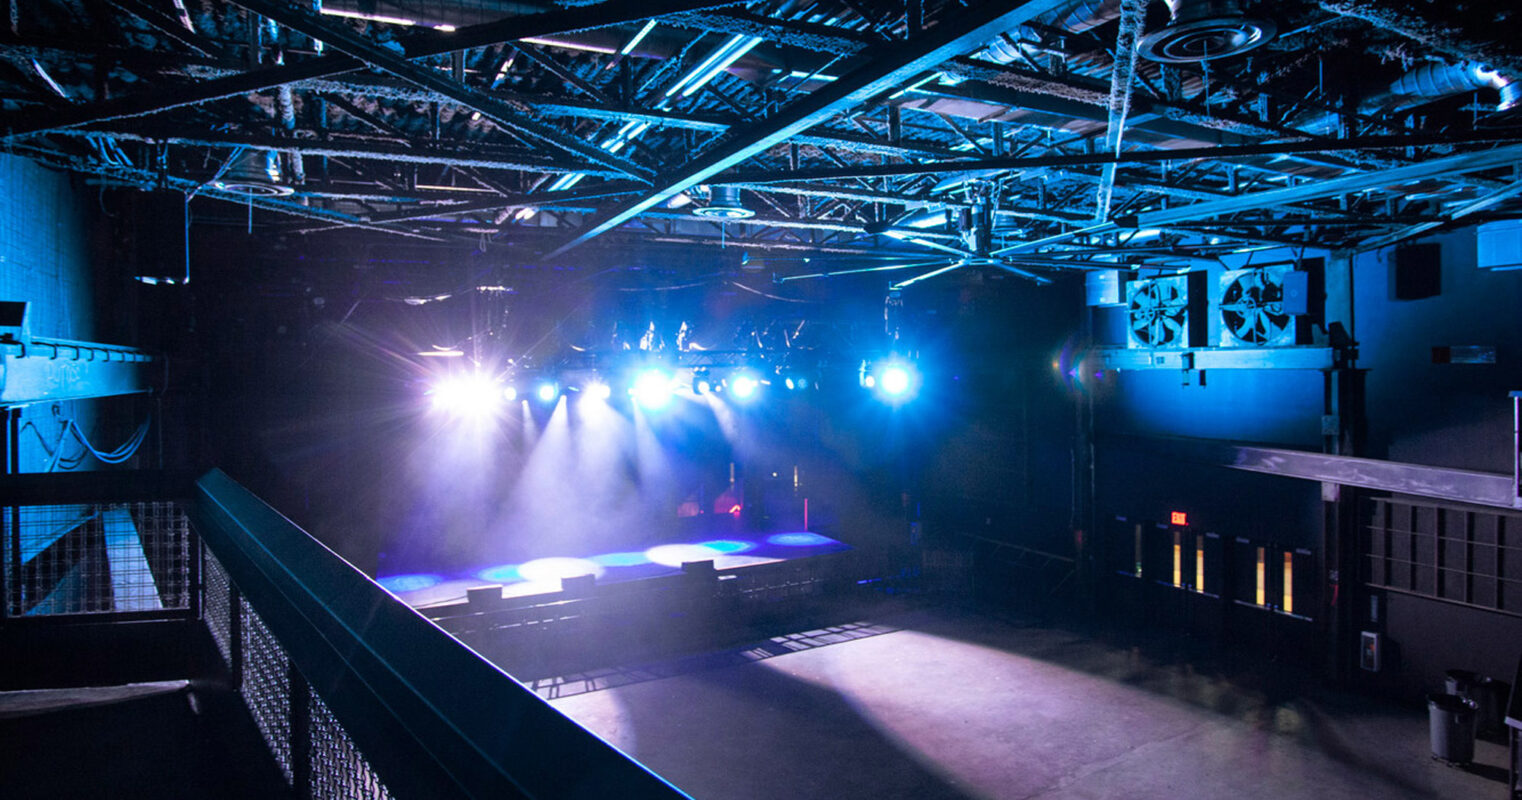 Modern nightclub interior showcasing industrial design elements, with exposed metal trusses, strategic blue and white lighting casting dynamic shadows, and an empty dance floor inviting anticipation of nightly revelries.